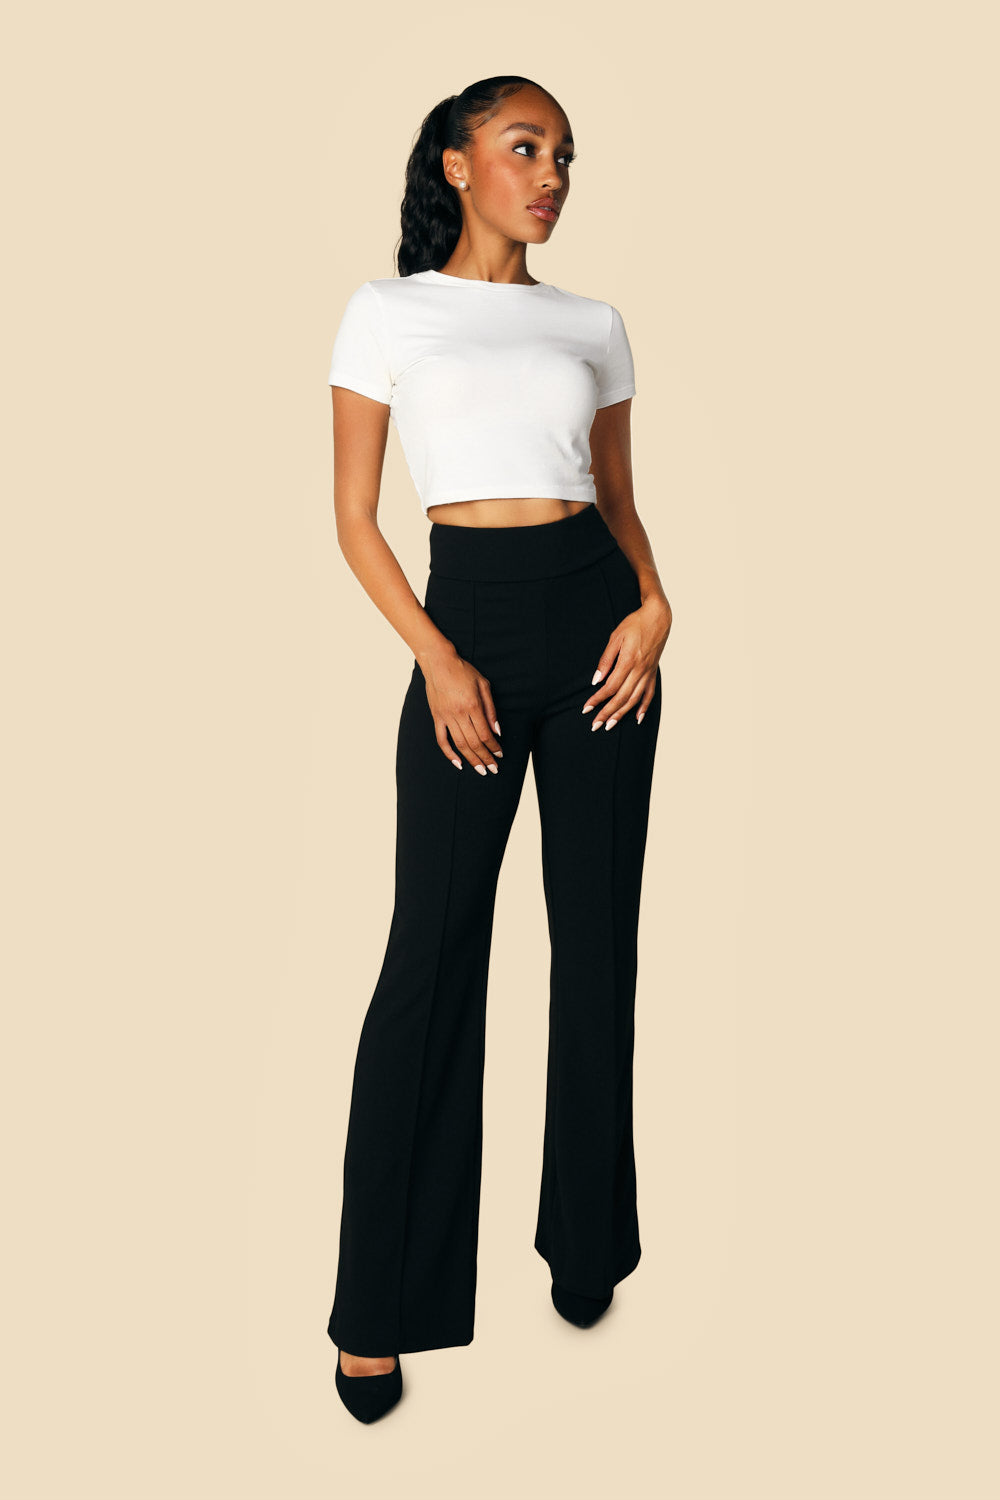 Apartment Pants - Black with White X – The Comfort Club